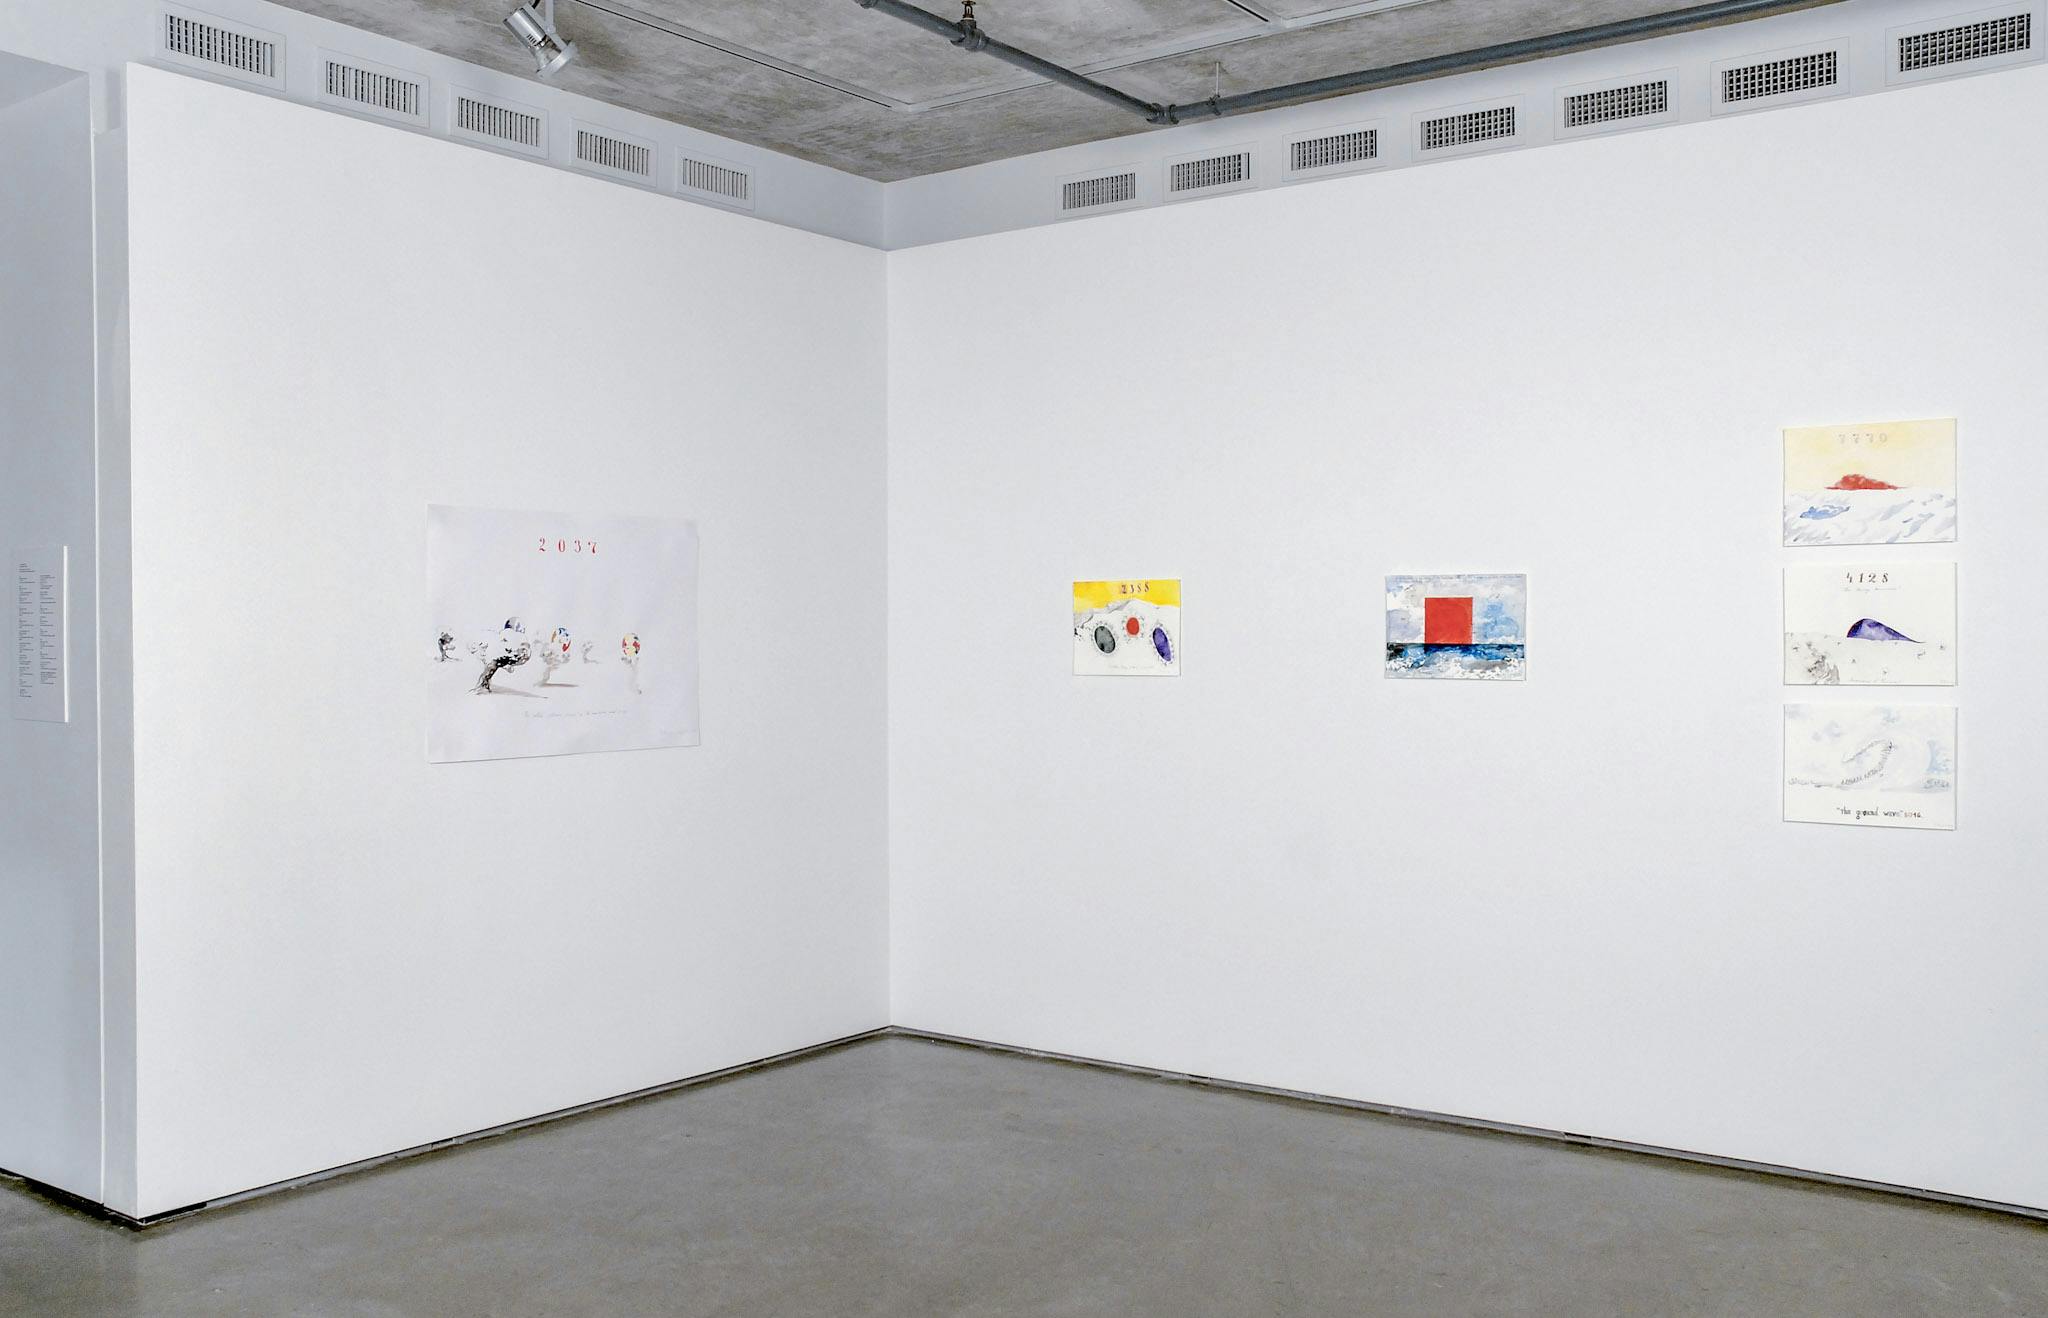 Unframed colour drawings are exhibited in a gallery space. Five pieces on the walls are visible in this image. They depict organic shapes including waves and some single-celled organisms.